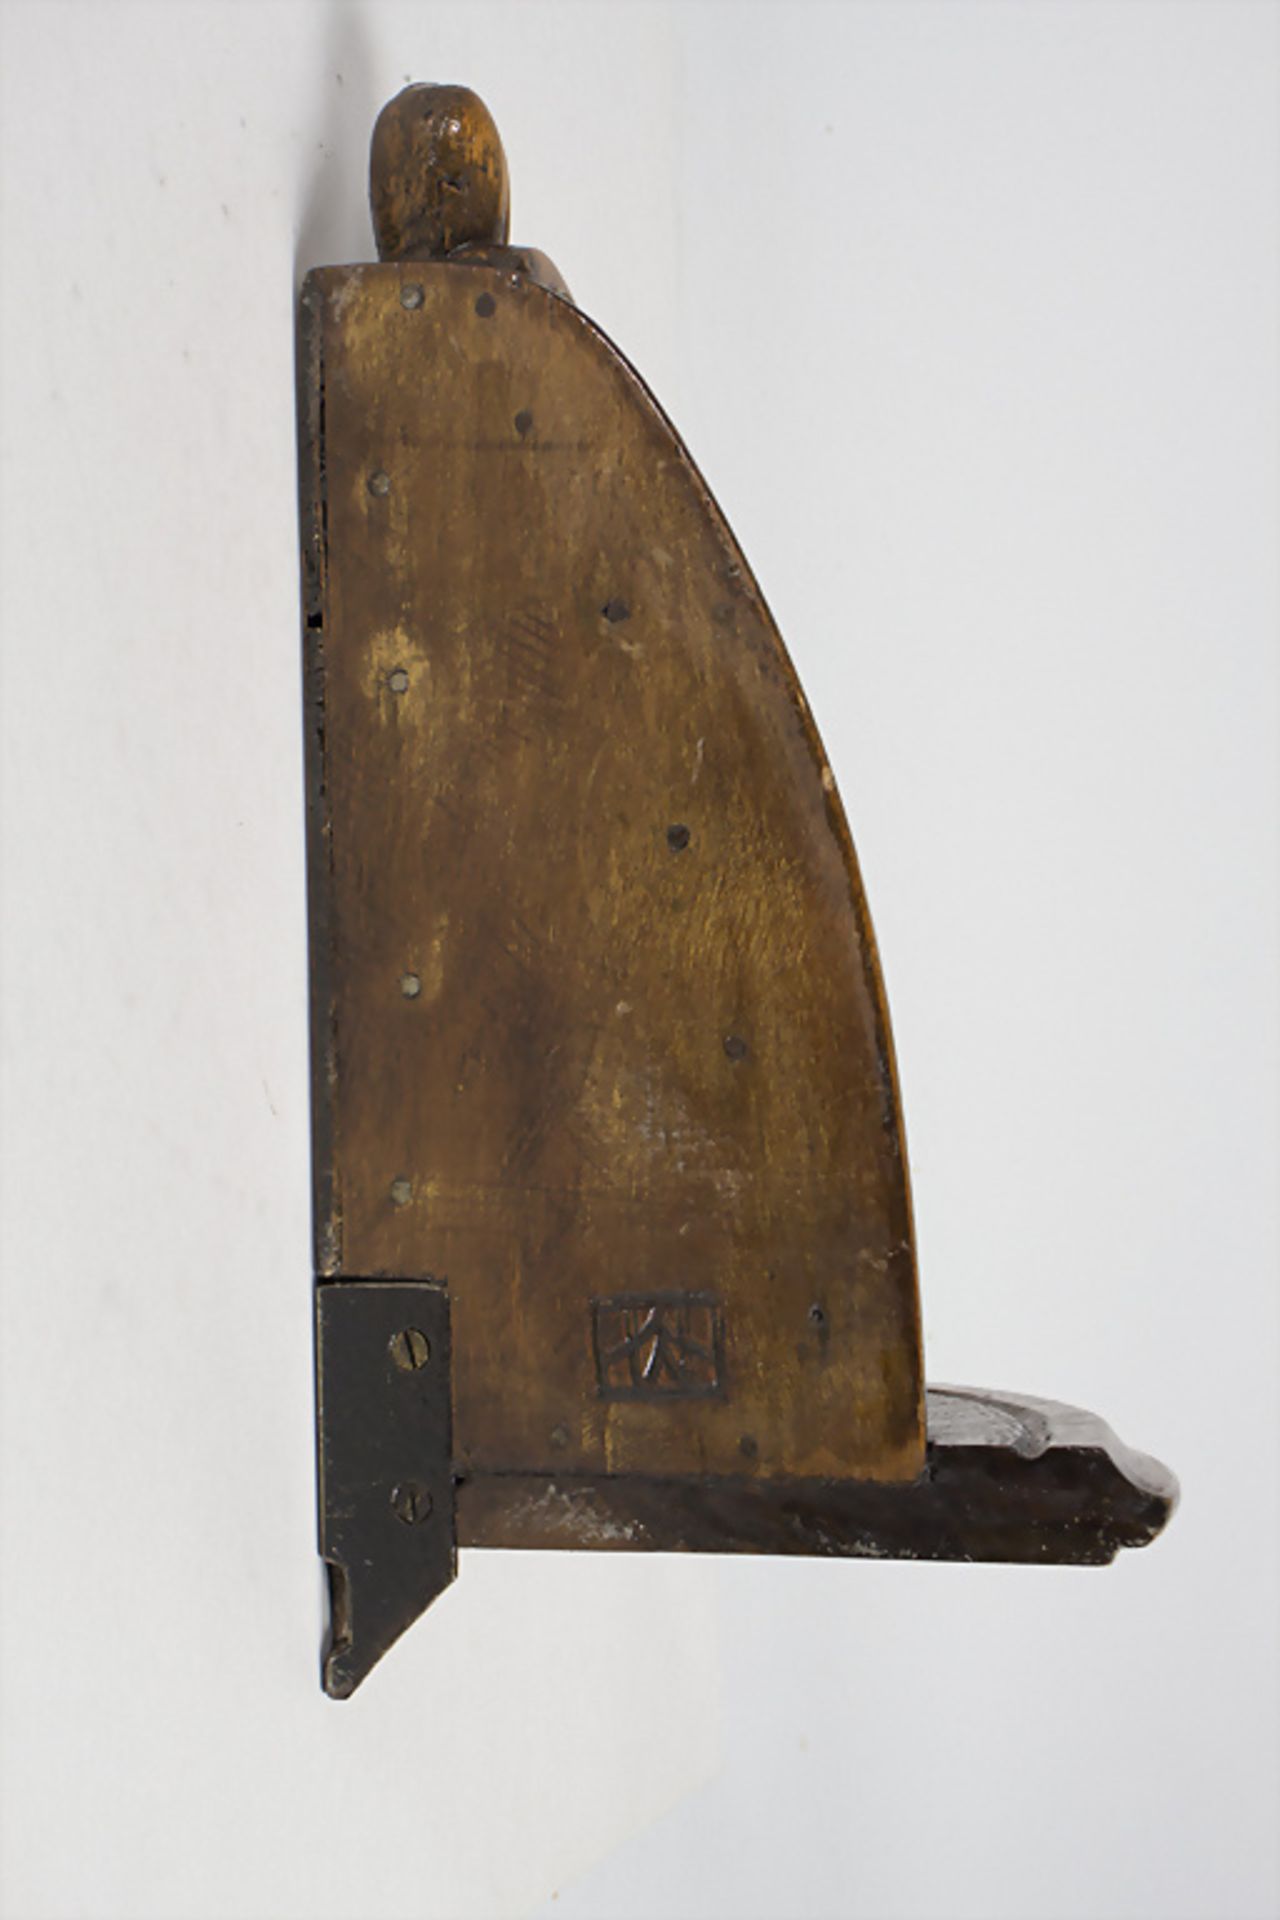 Eckkonsole mit Frauenkopf / A wooden console with the head of a young woman, 1970 - Image 3 of 5